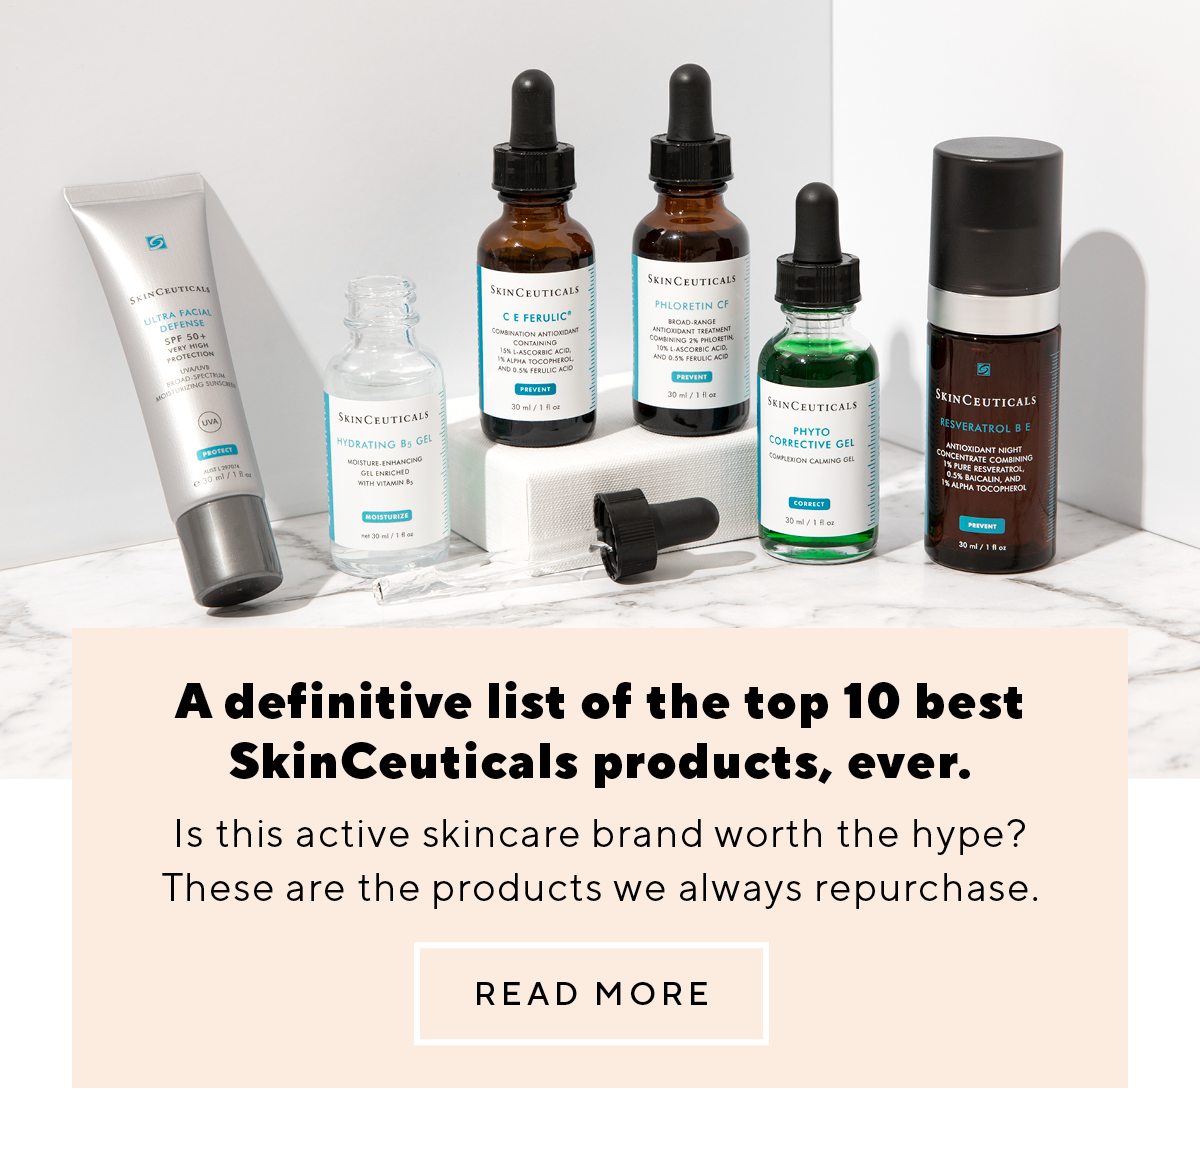 A definitive list of the top 10 best SkinCeuticals products, ever.